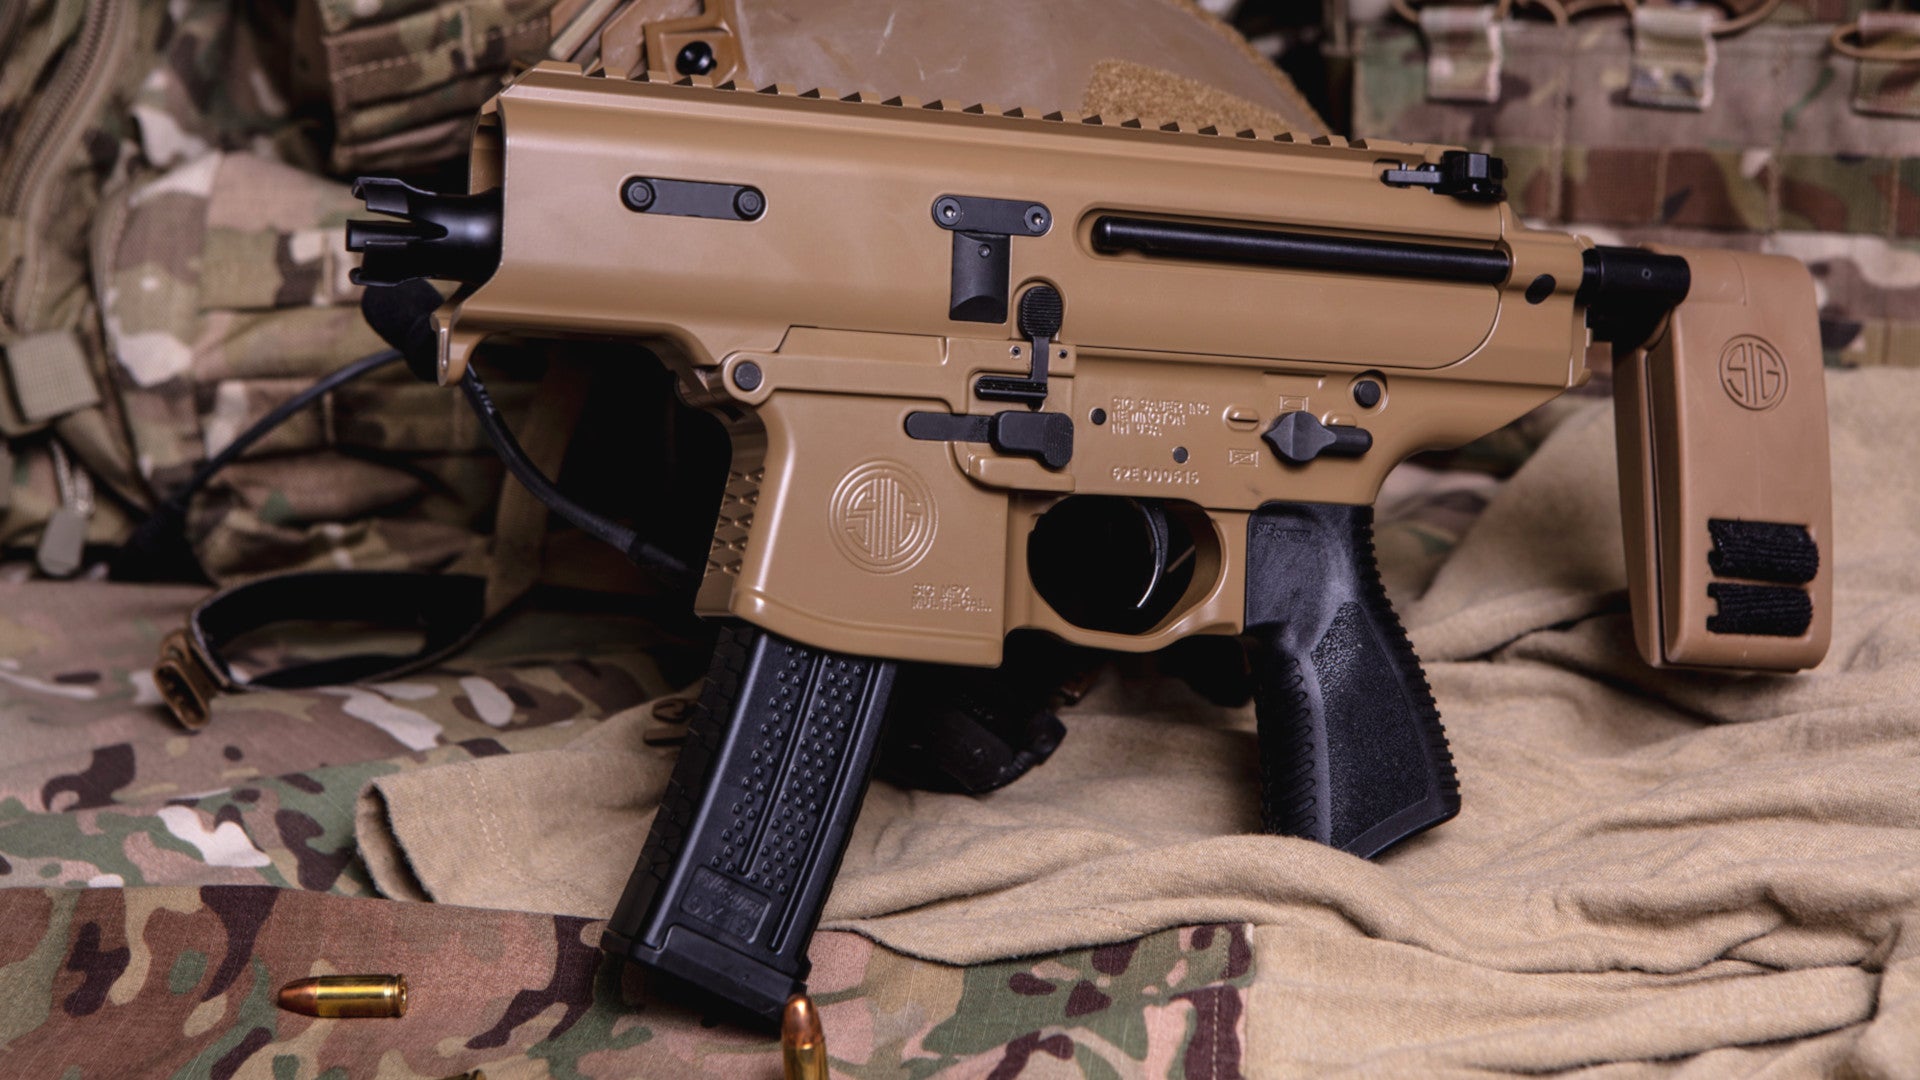 Sig Sauer’s Tiny Copperhead Submachine Gun Looks Made For the U.S. Army’s Requirements